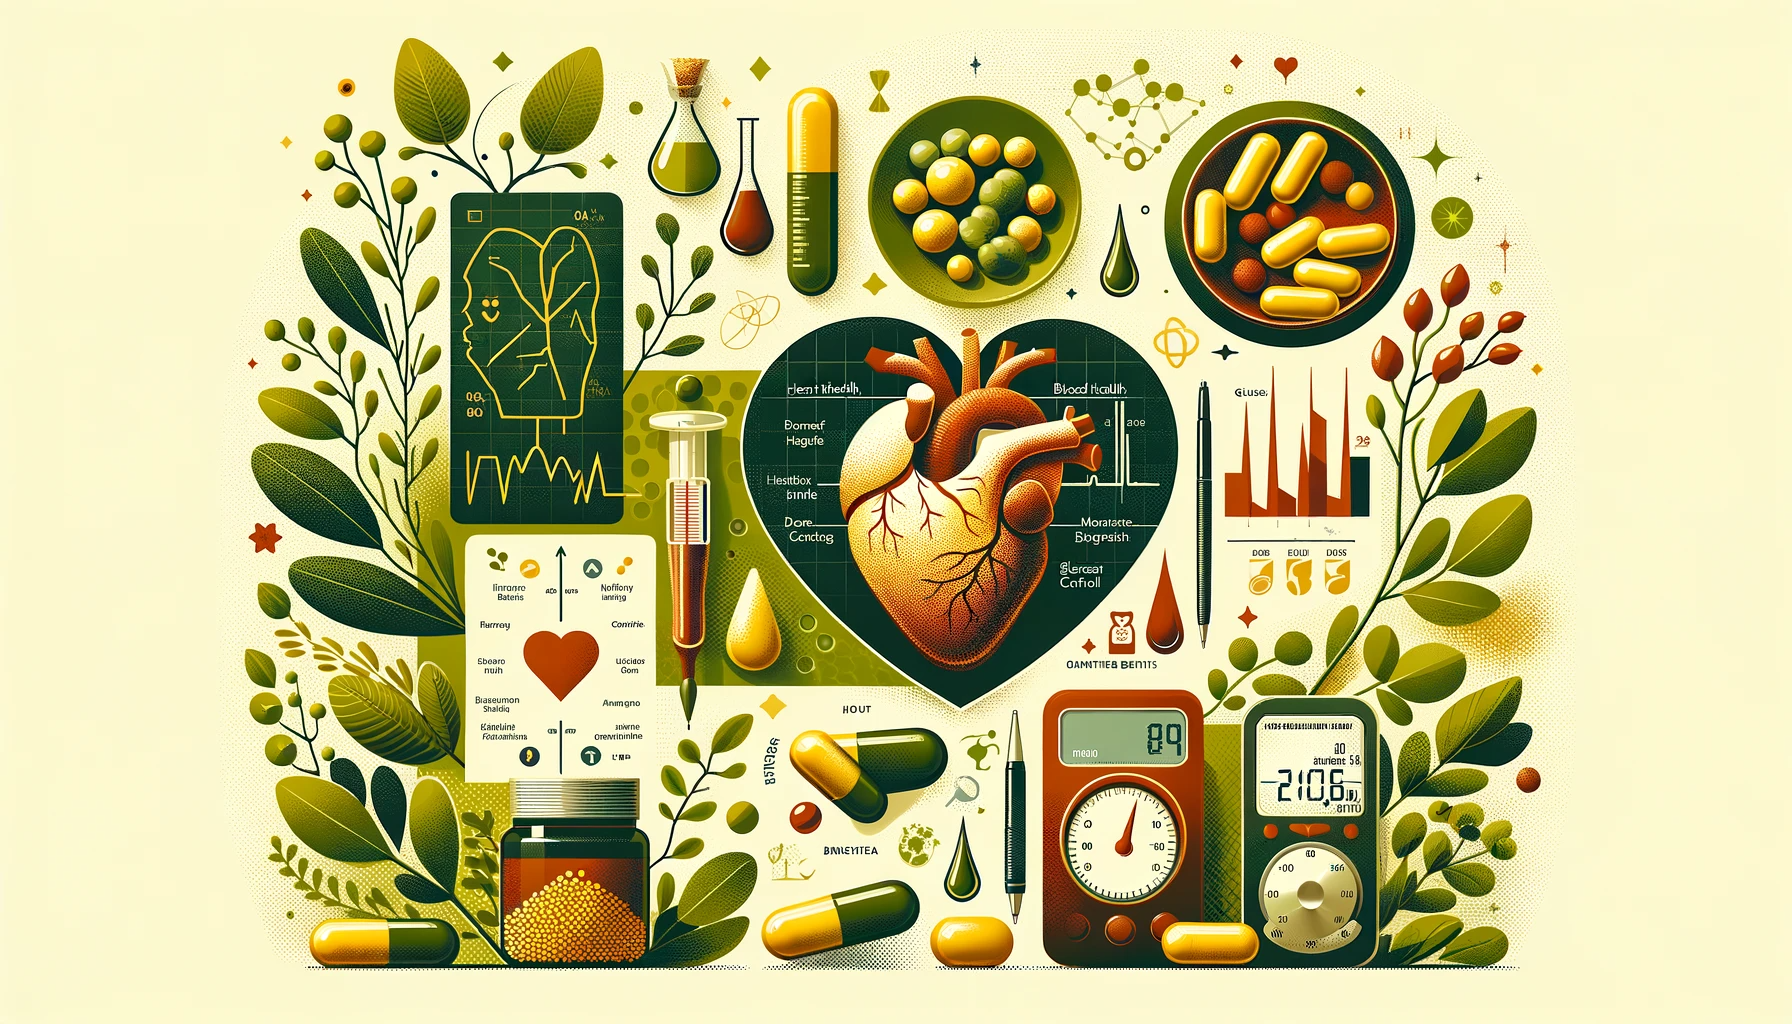 Collage of Berberine health benefits, featuring Berberine capsules, Berberis plant, heart icon for heart health, glucose meter for blood sugar control, and scale for weight management, with a natural green and yellow color scheme.